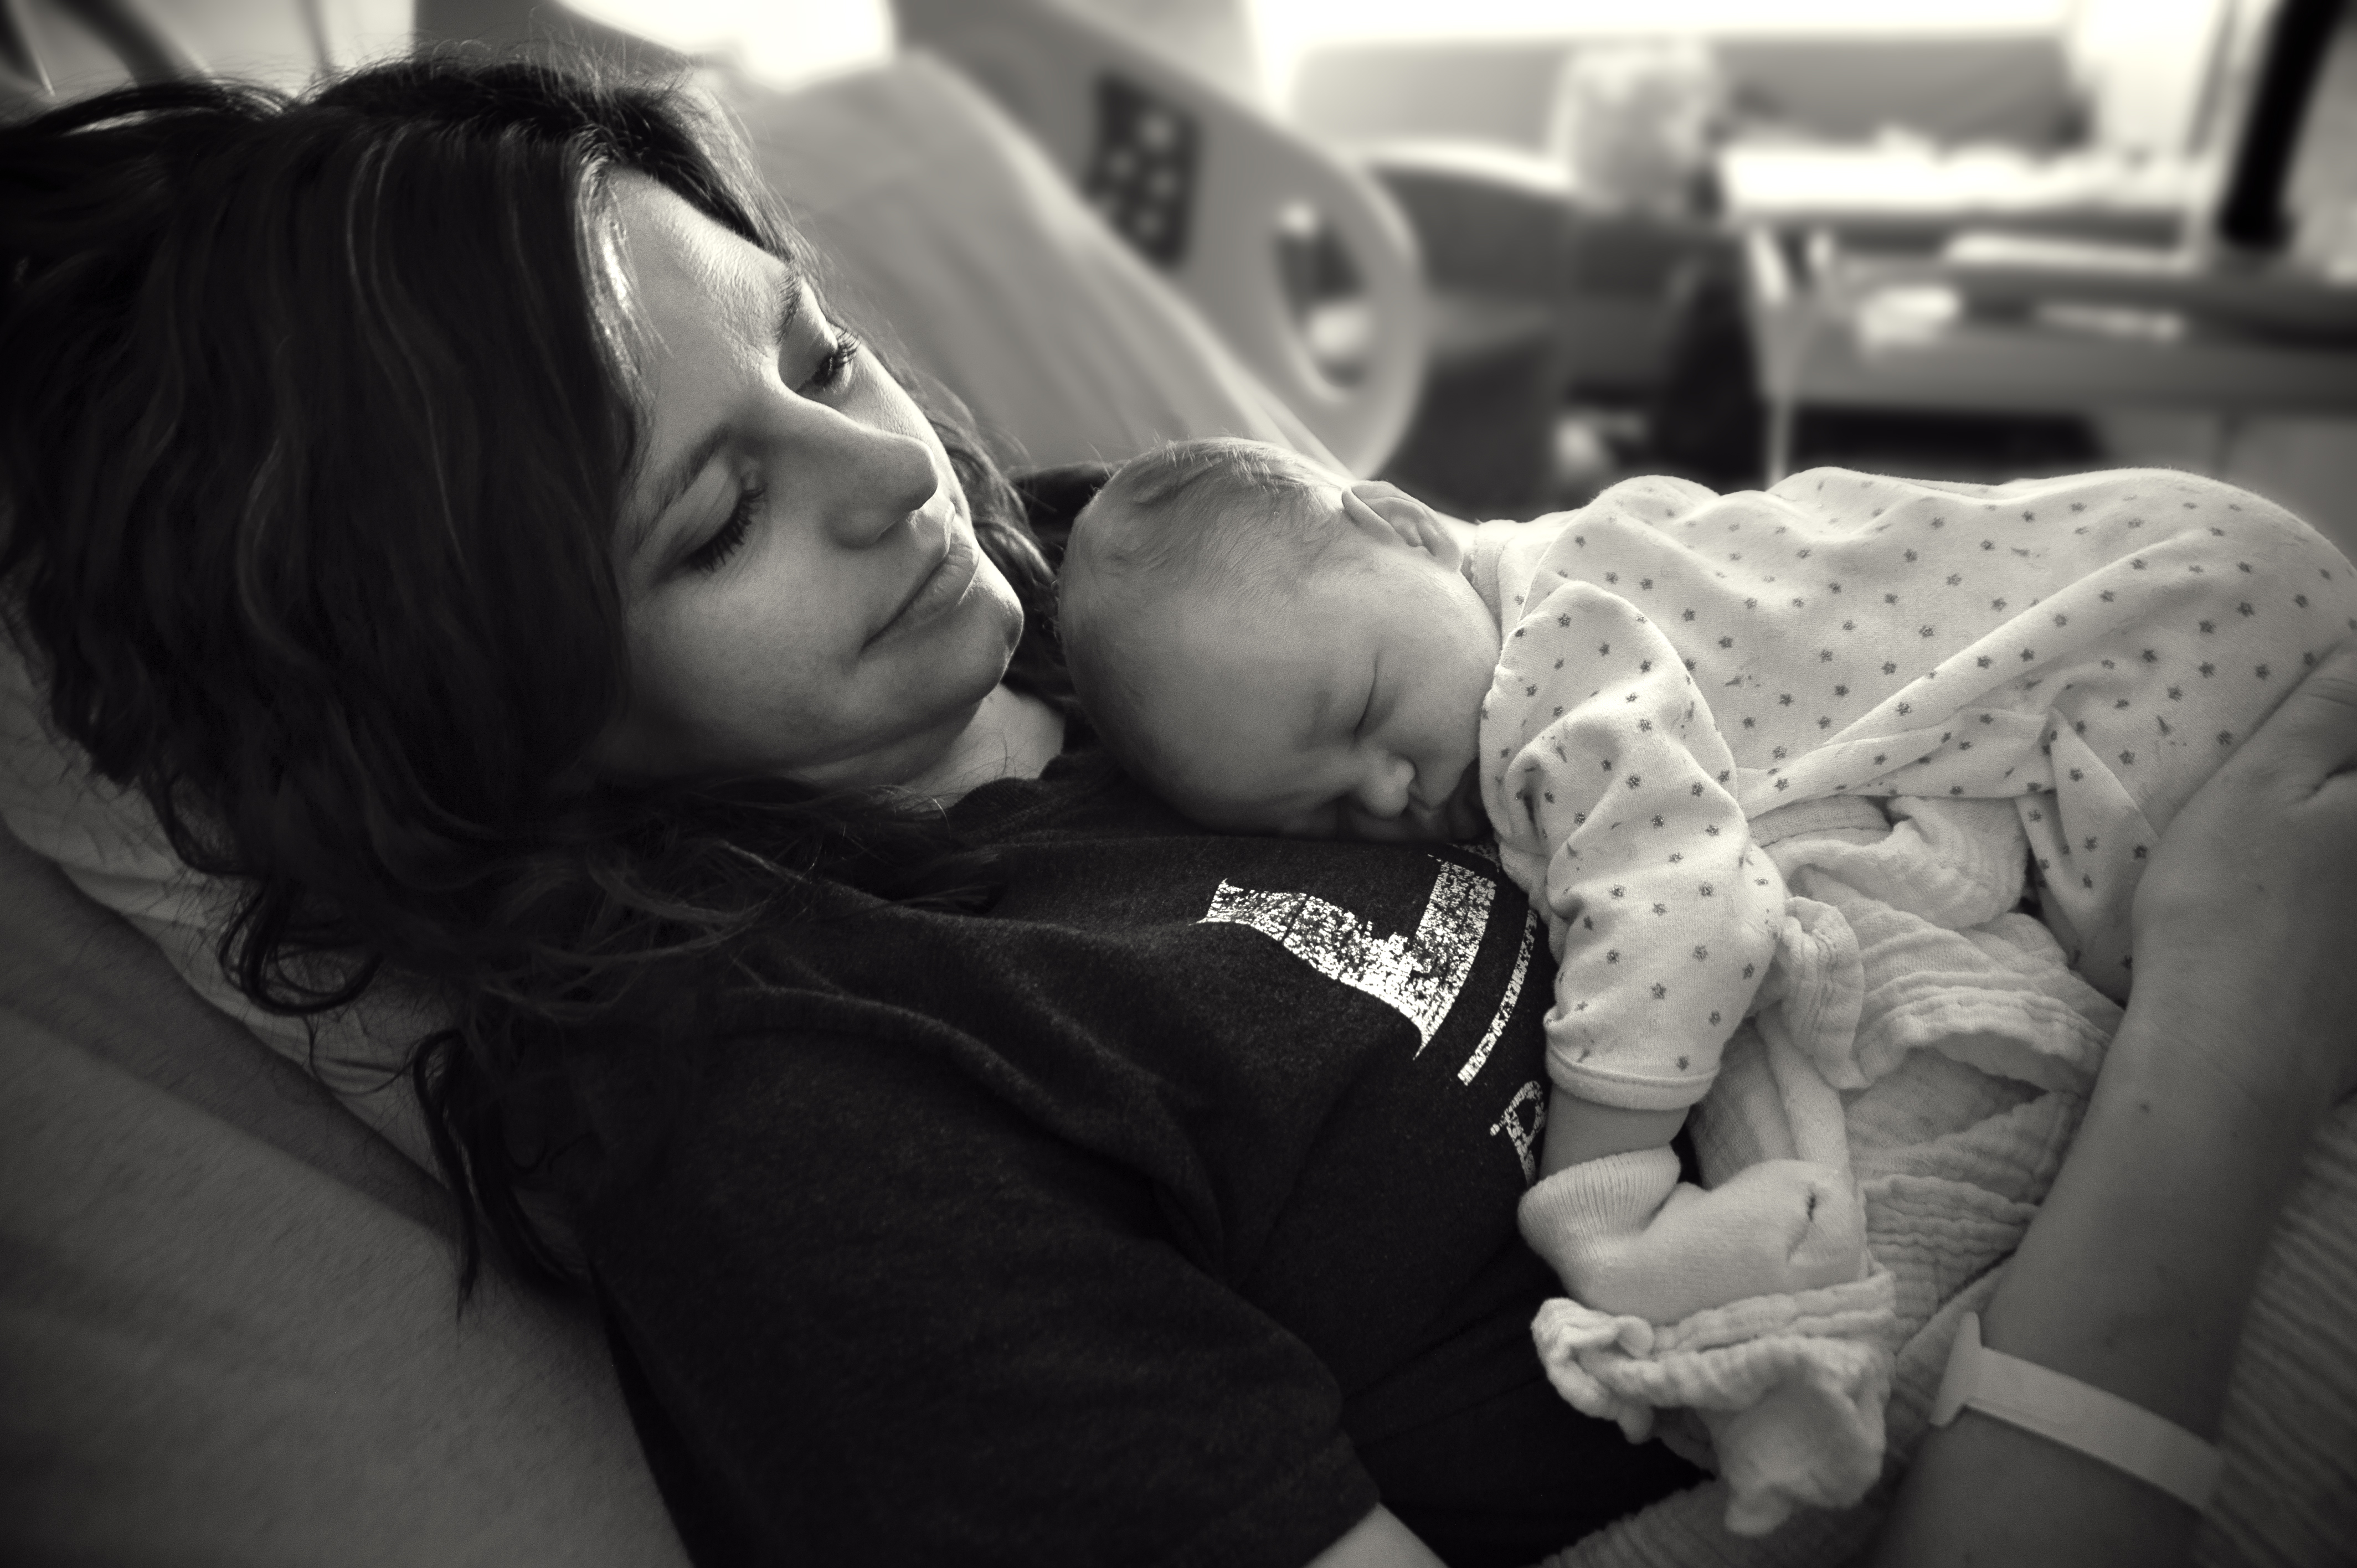 photo of Brooklyn sleeping on Diana's chest in the hospital